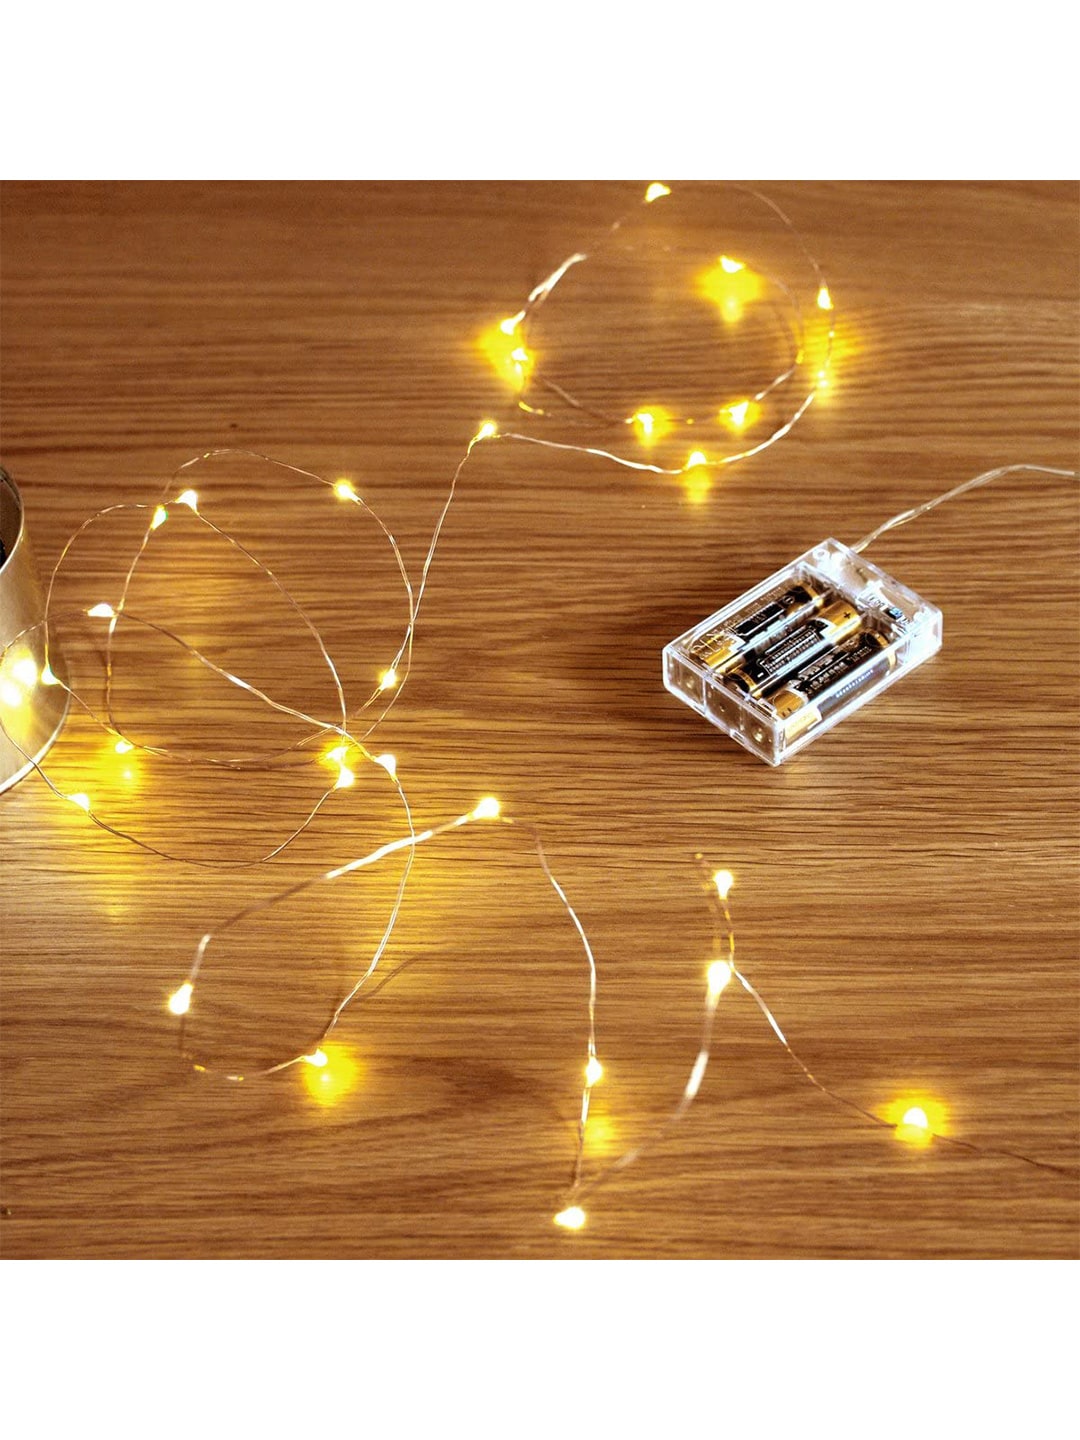 XERGY White AA Battery Operated 100 LED Fairy String Light Price in India